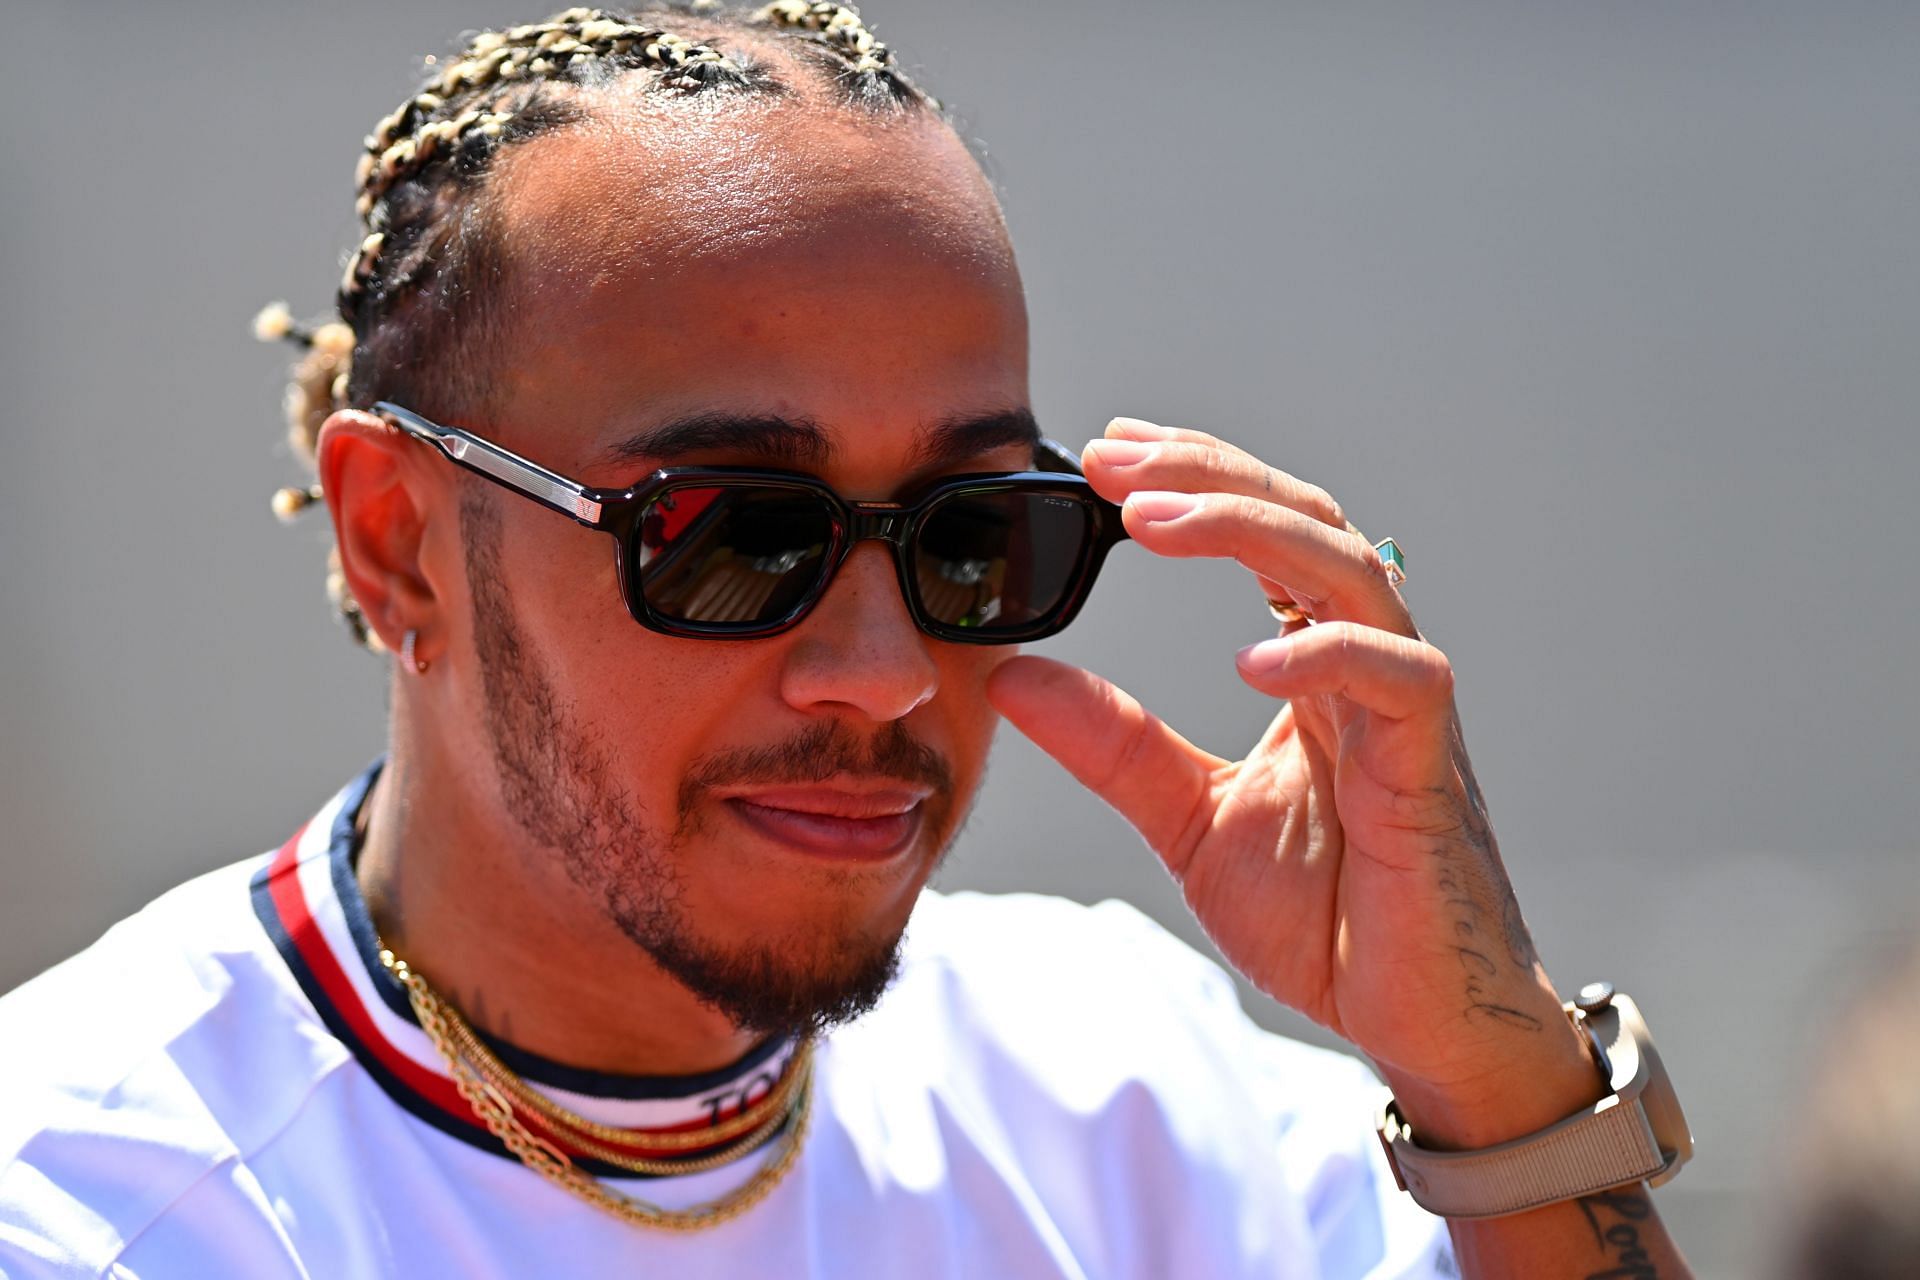 Lewis Hamilton at the F1 Grand Prix of France